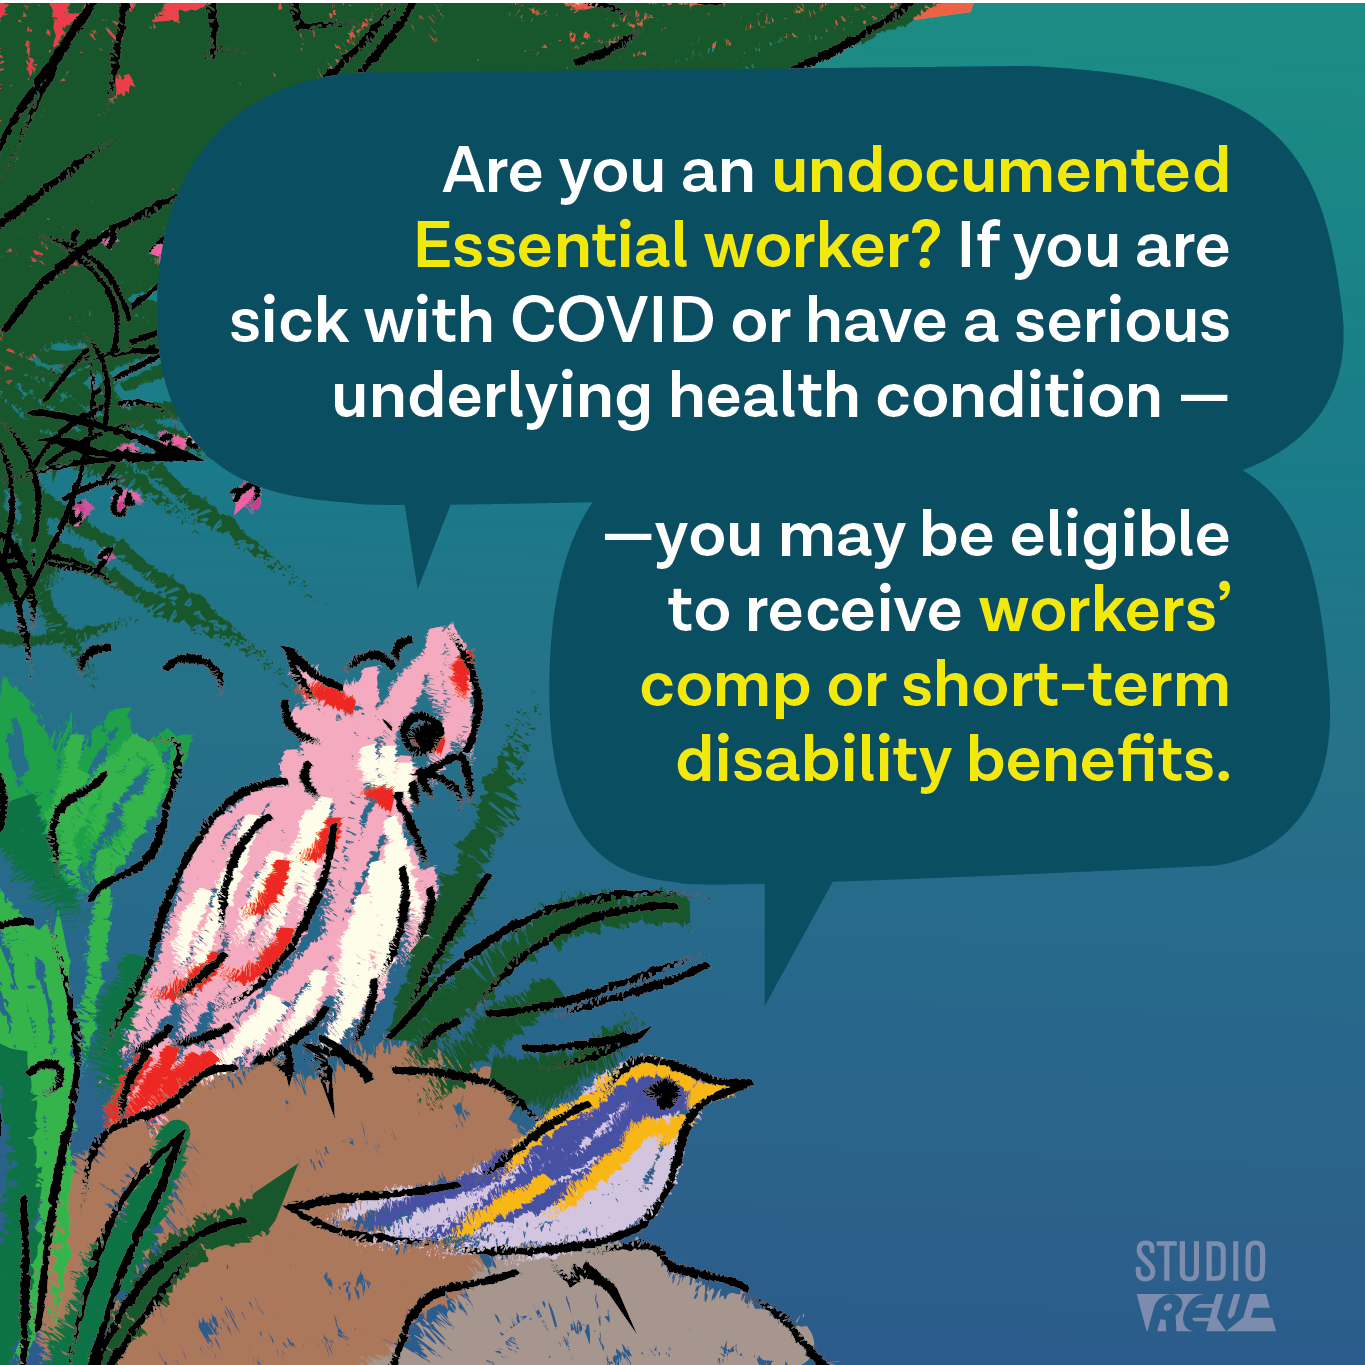 WorkersComp_or_Disability_UndocEssential.png